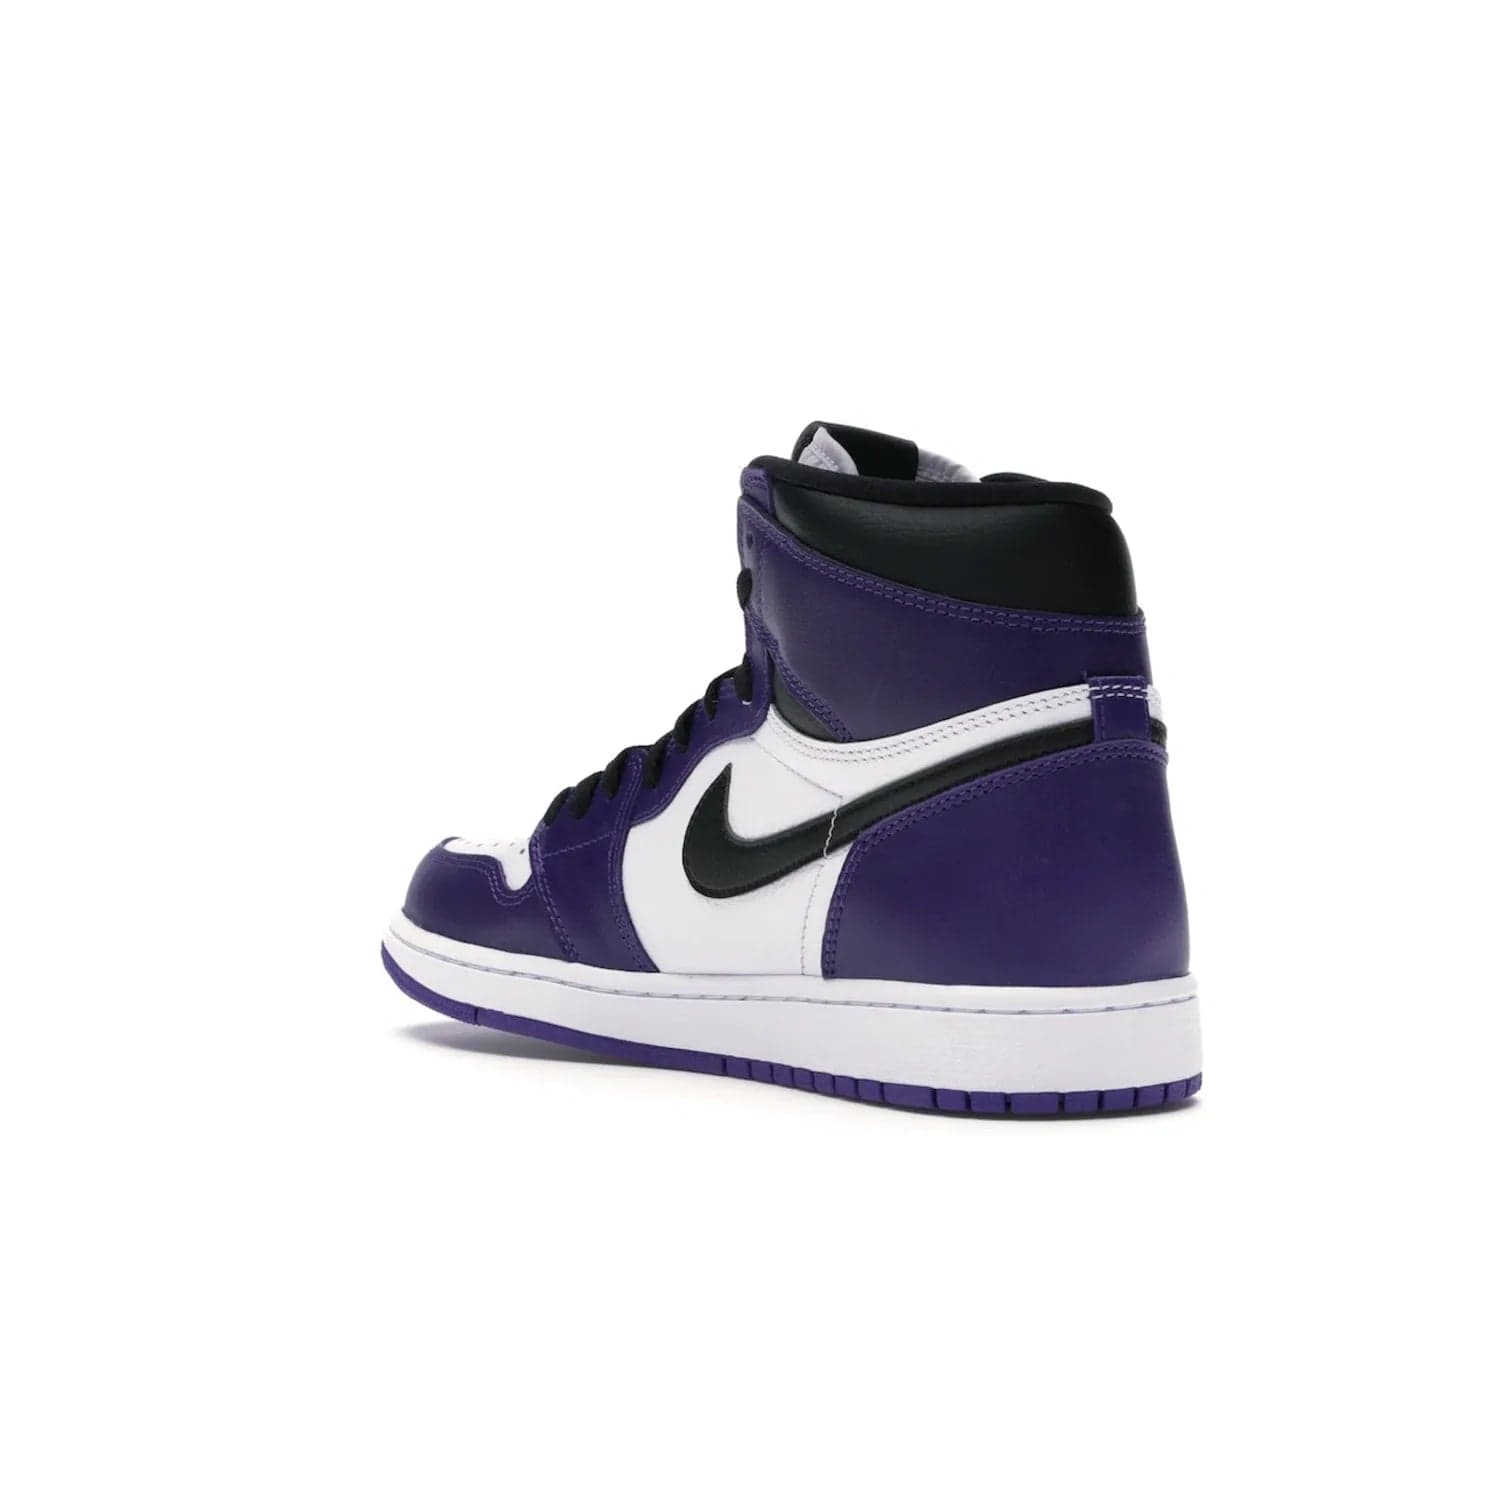 Jordan 1 Retro High Court Purple White - Image 24 - Only at www.BallersClubKickz.com - Grab the classic Jordan 1 Retro High Court Purple White and add major flavor to your collection. White leather upper with Court Purple overlays and Swoosh logo. White midsole and purple outsole. Get yours and rep your Jordan Brand.